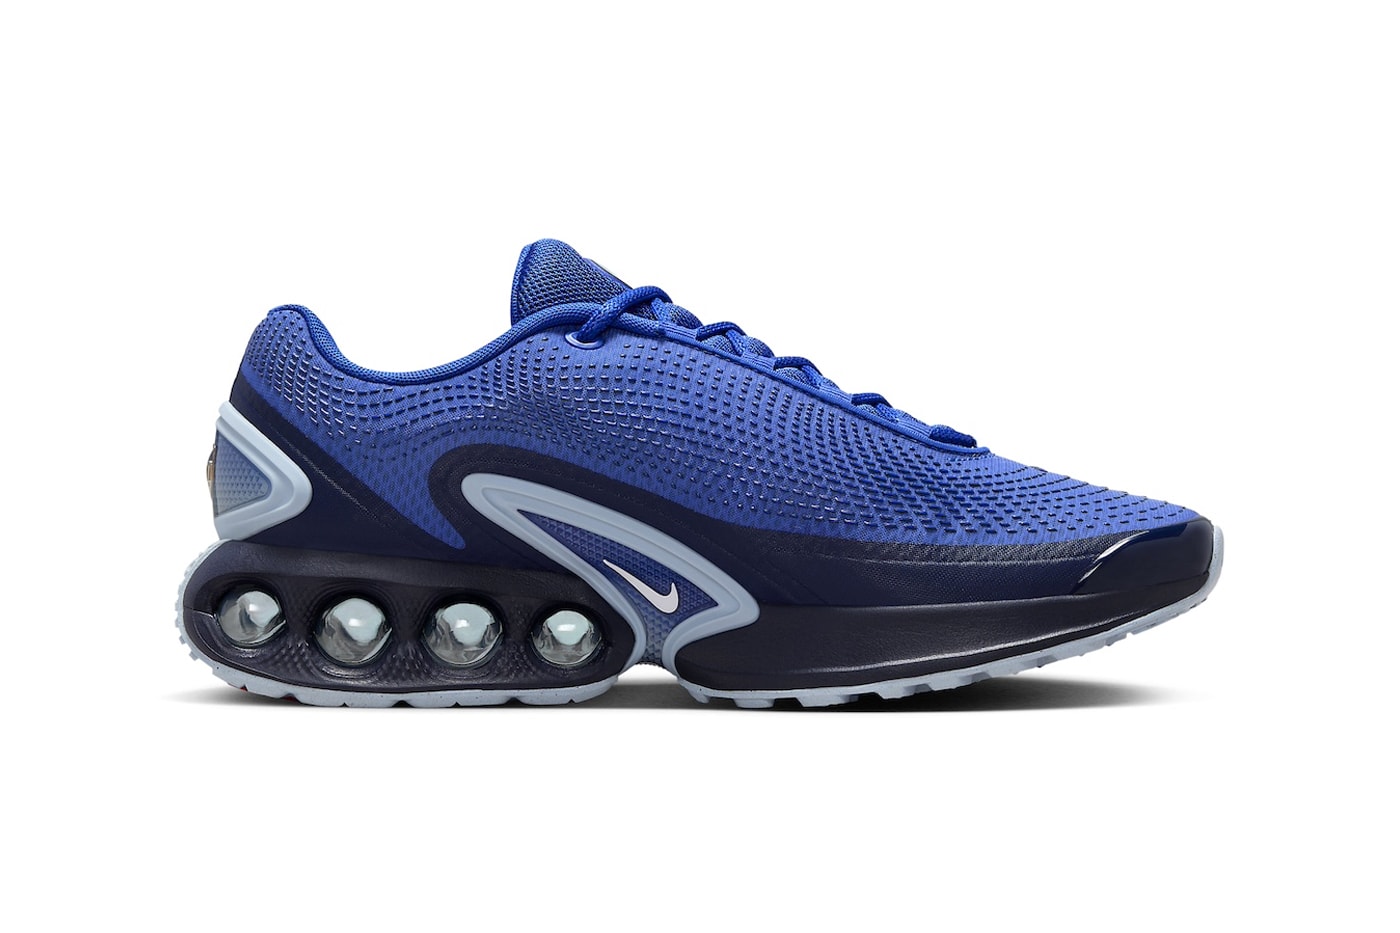 Nike Air Max Dn Surfaces in "Hyper Blue" Midnight Navy-Light Armory Blue-White DV3337-400 sneaker futuristic new silhouette swoosh air max day spring 2024 release info